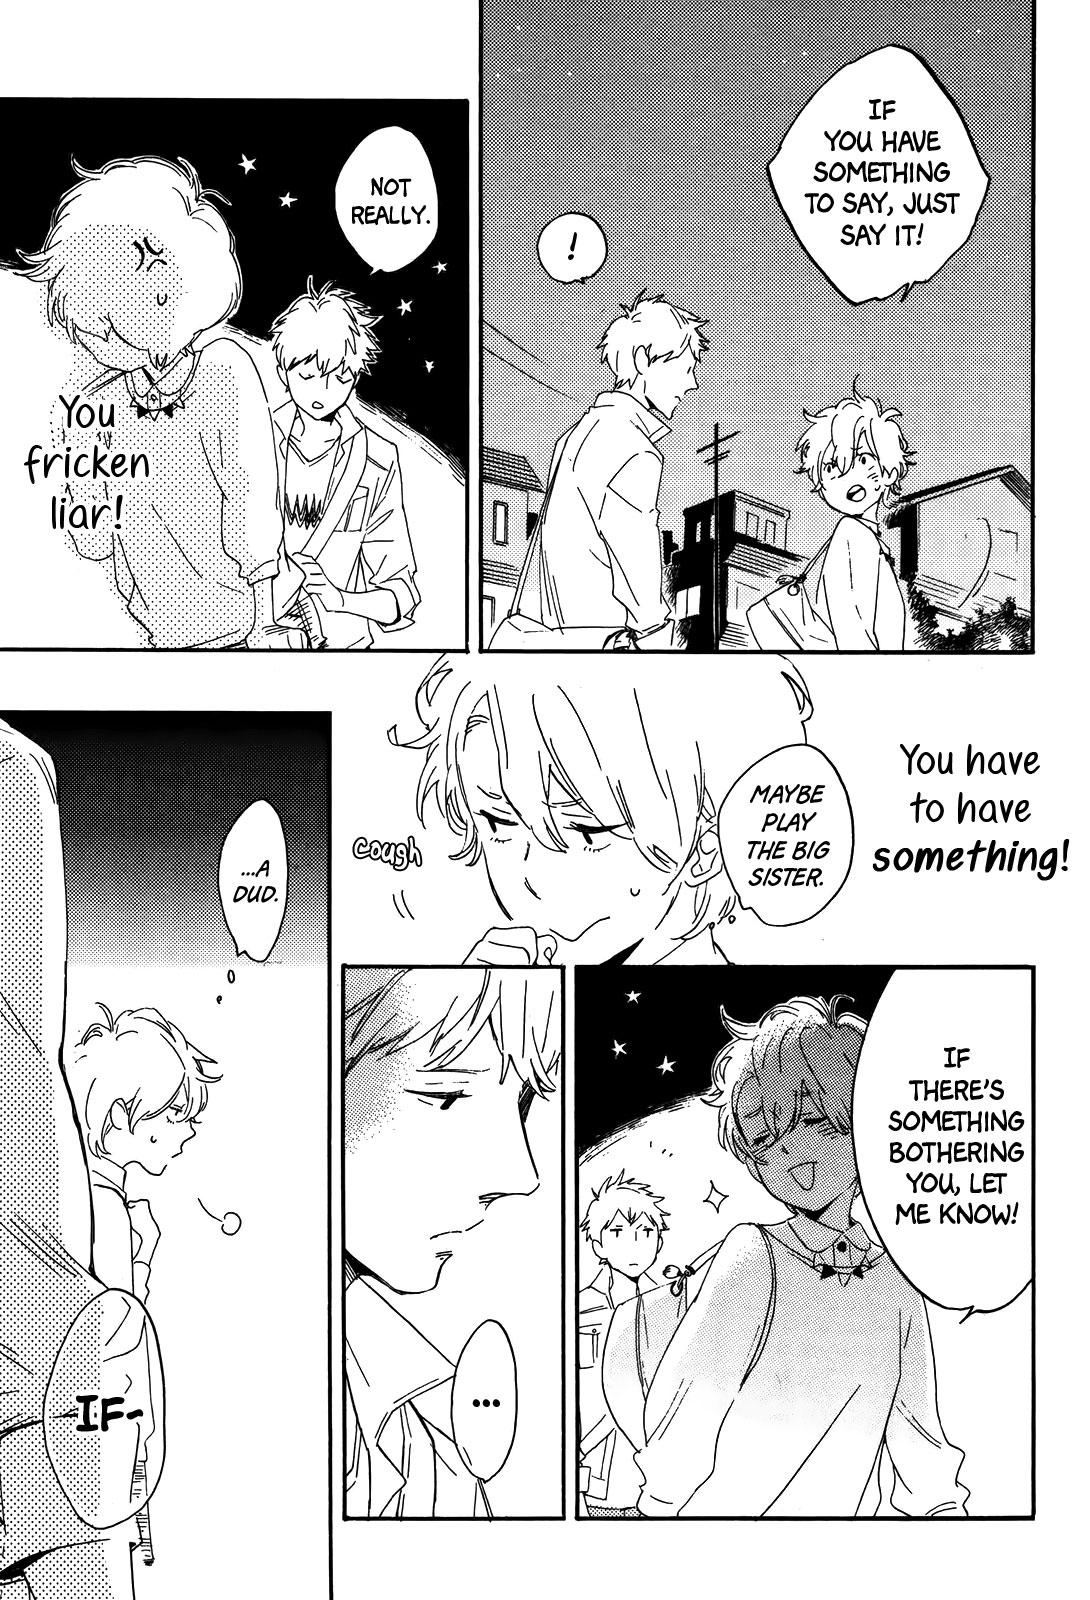 Flowers and Pints Vol. 1 Ch. 4